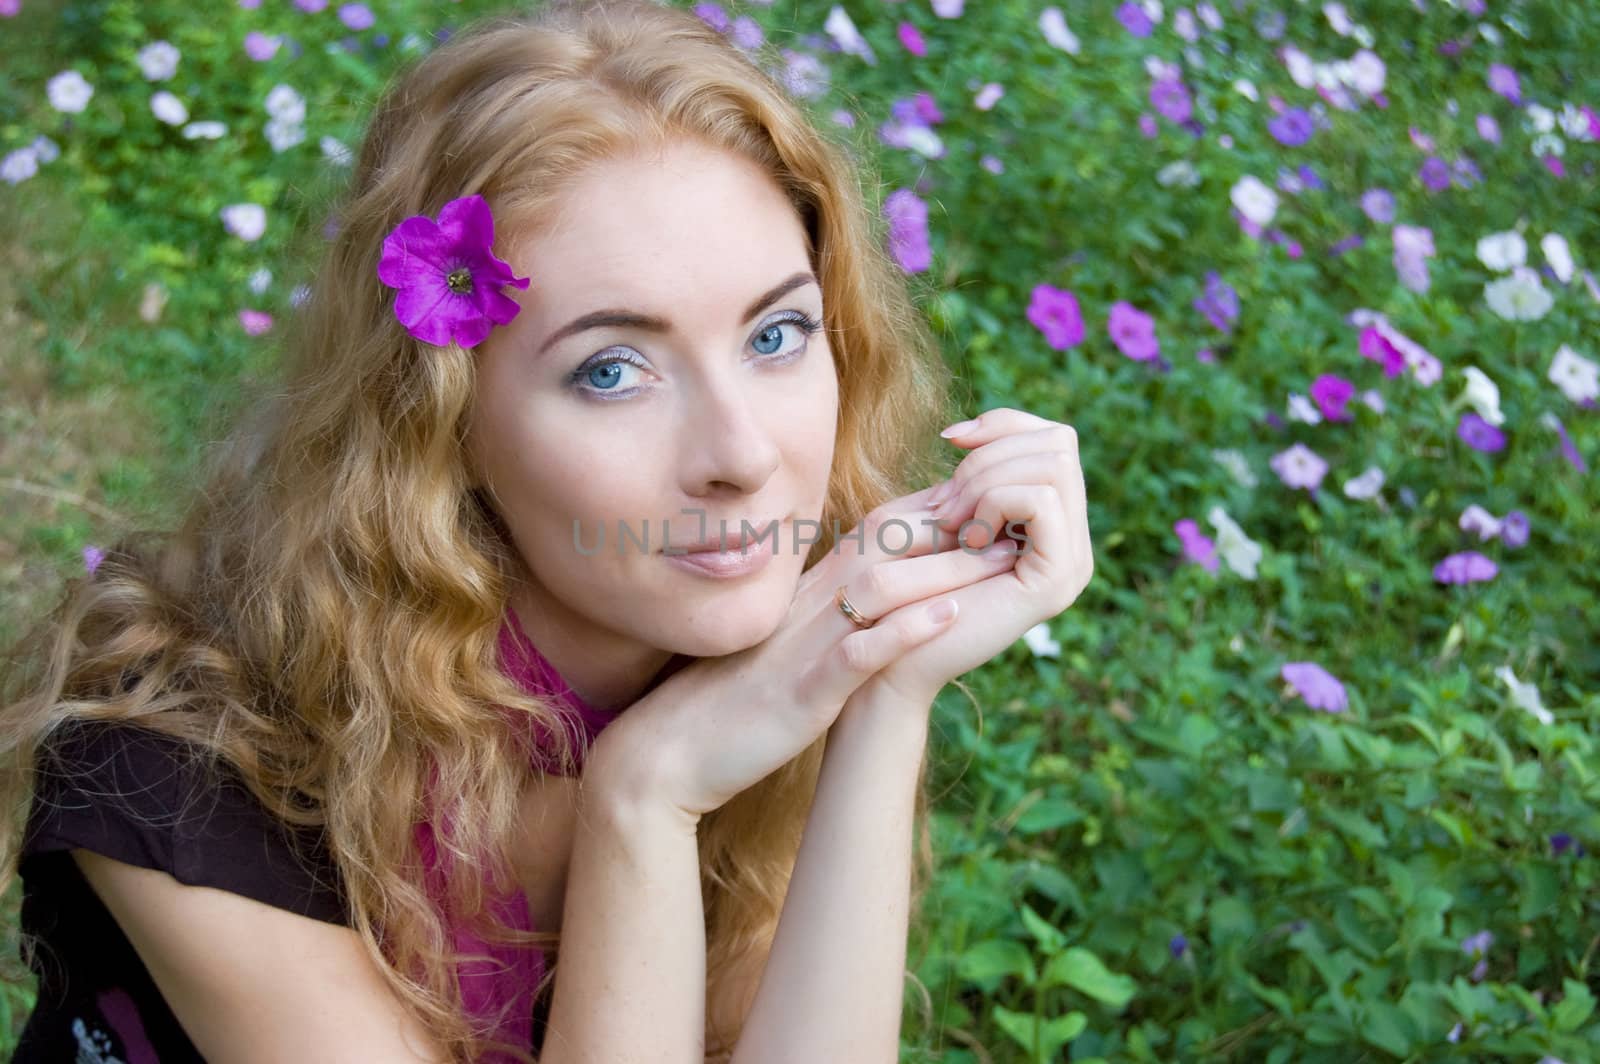 Red-headed woman among violet flowers in park